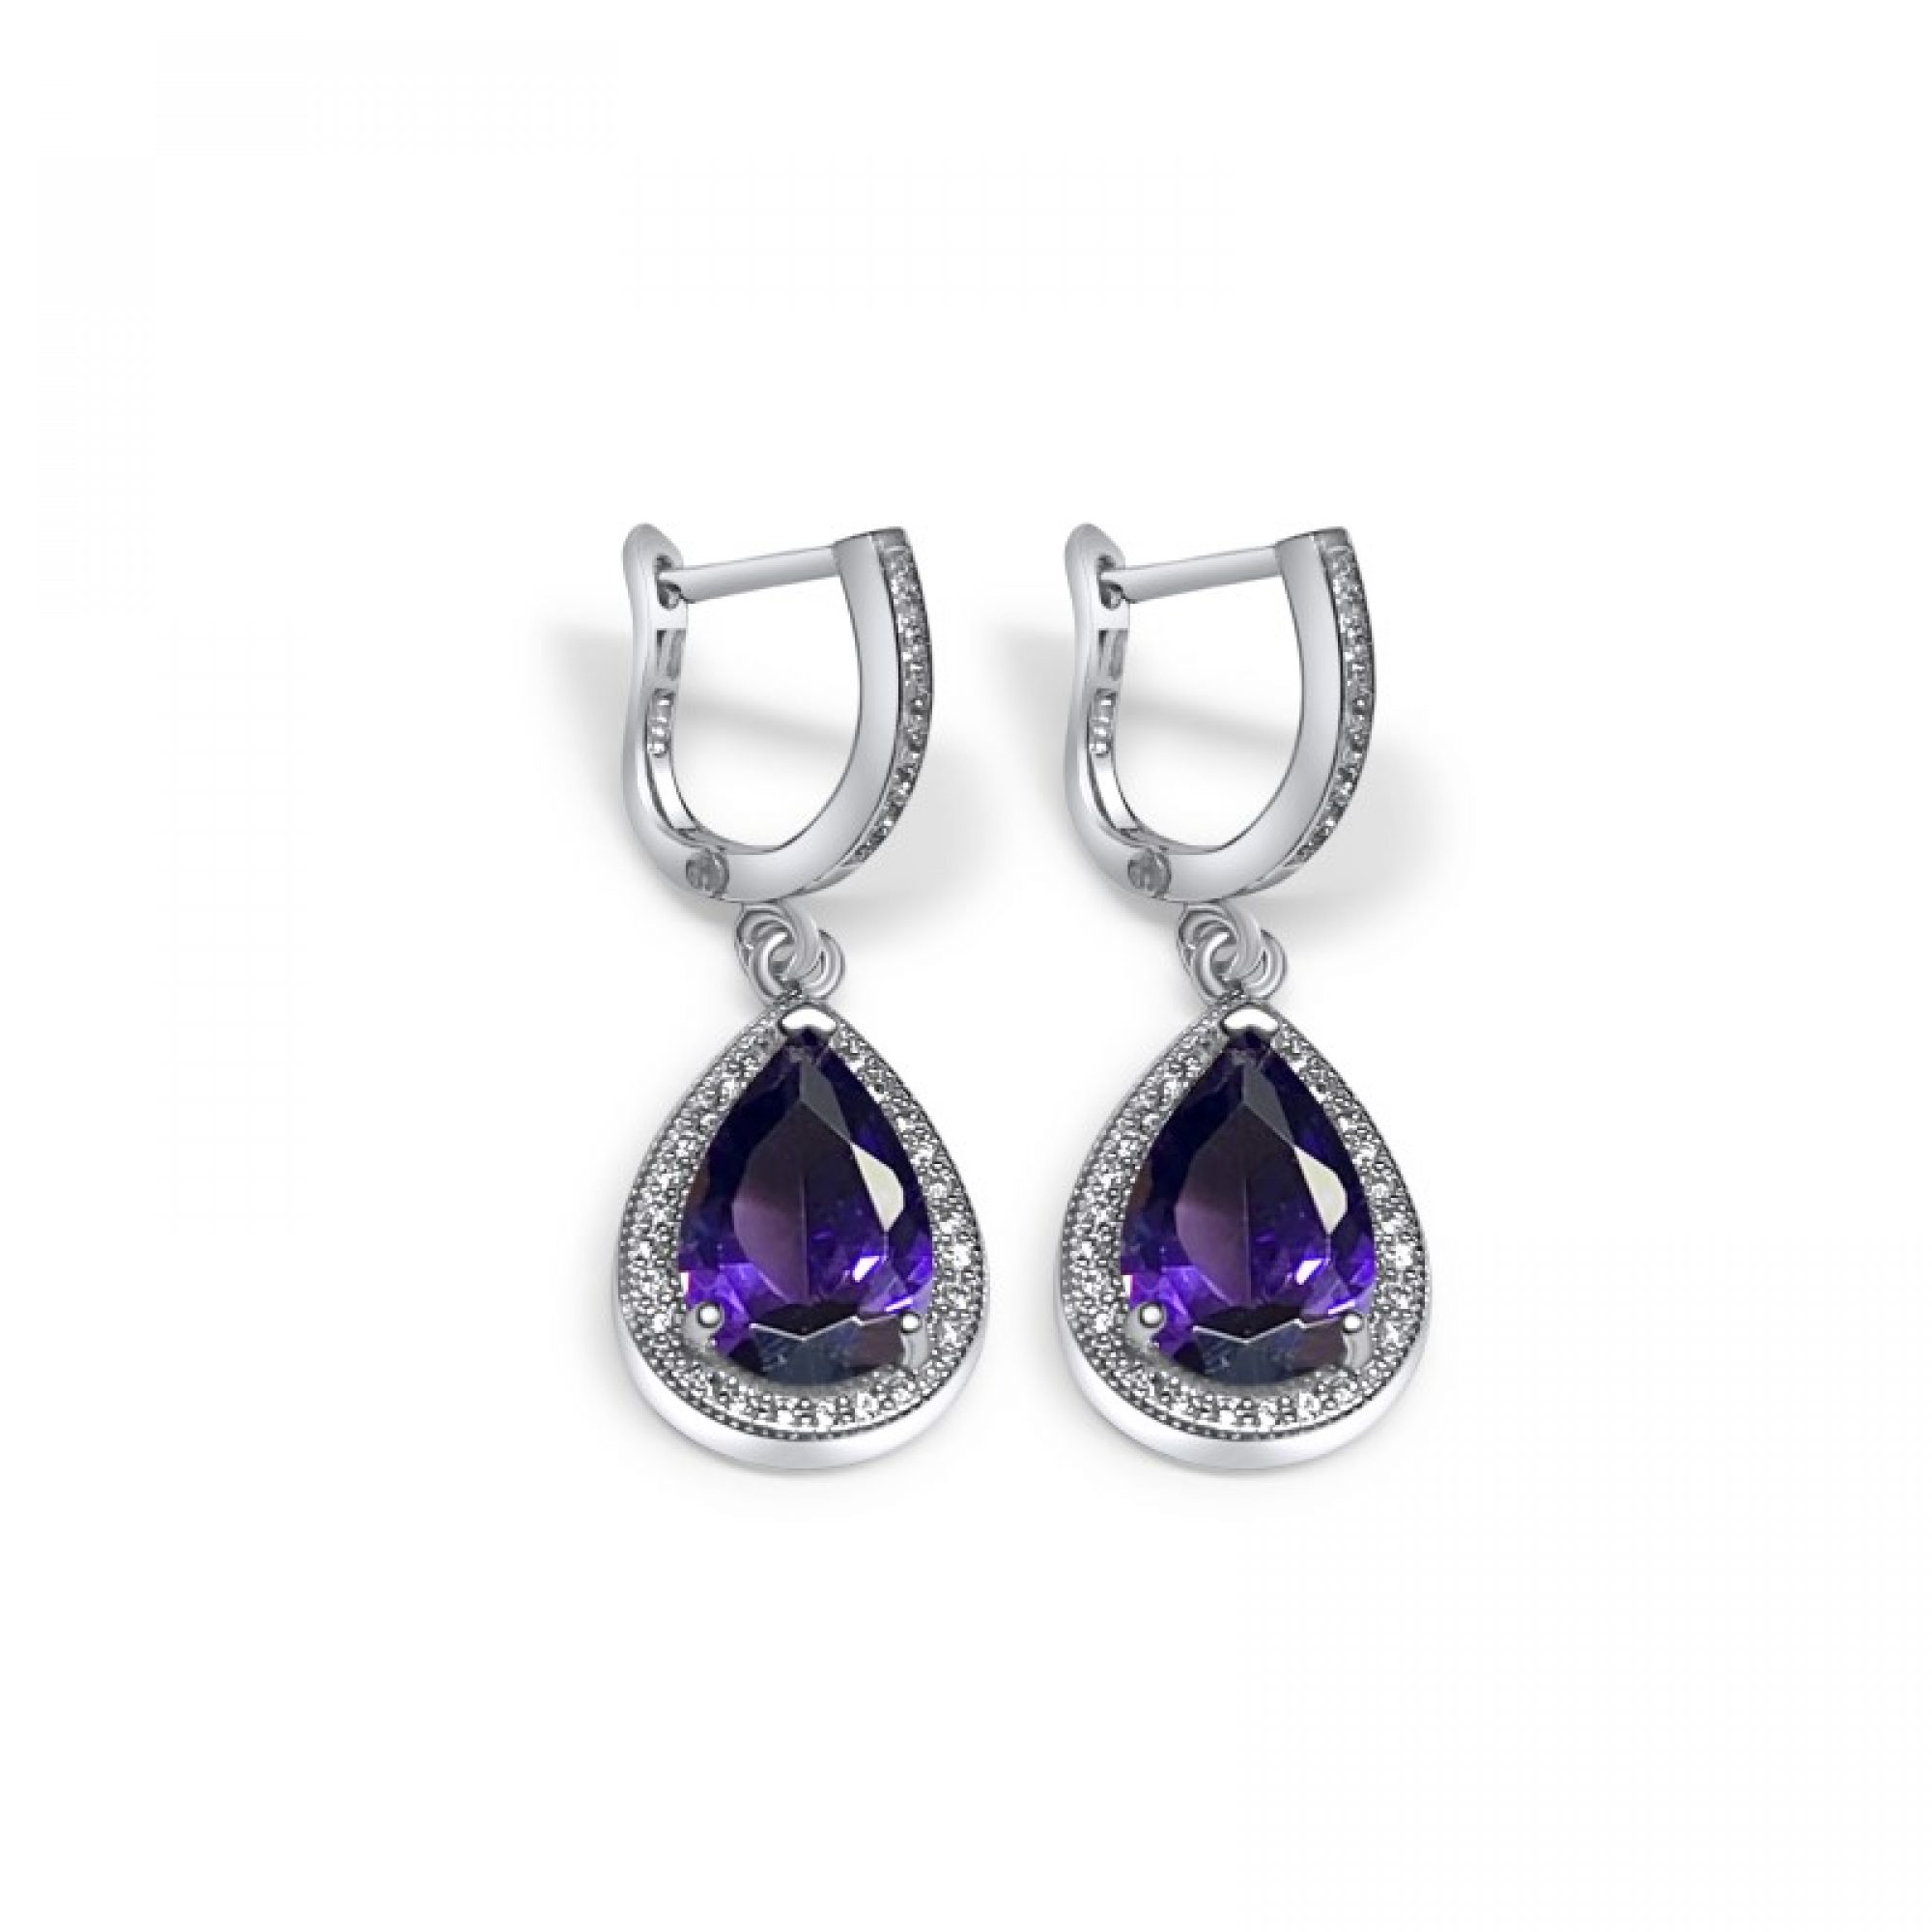 Silver earrings with amethyst and zircon stones